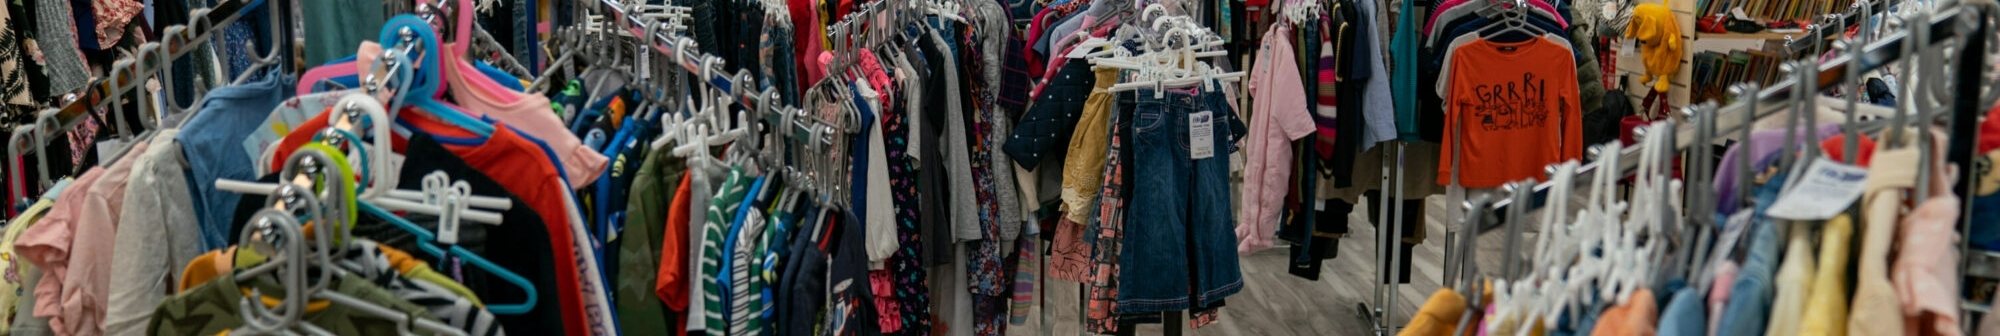 hundreds-of-items-of-clothing-on-sale-in-charity-shop